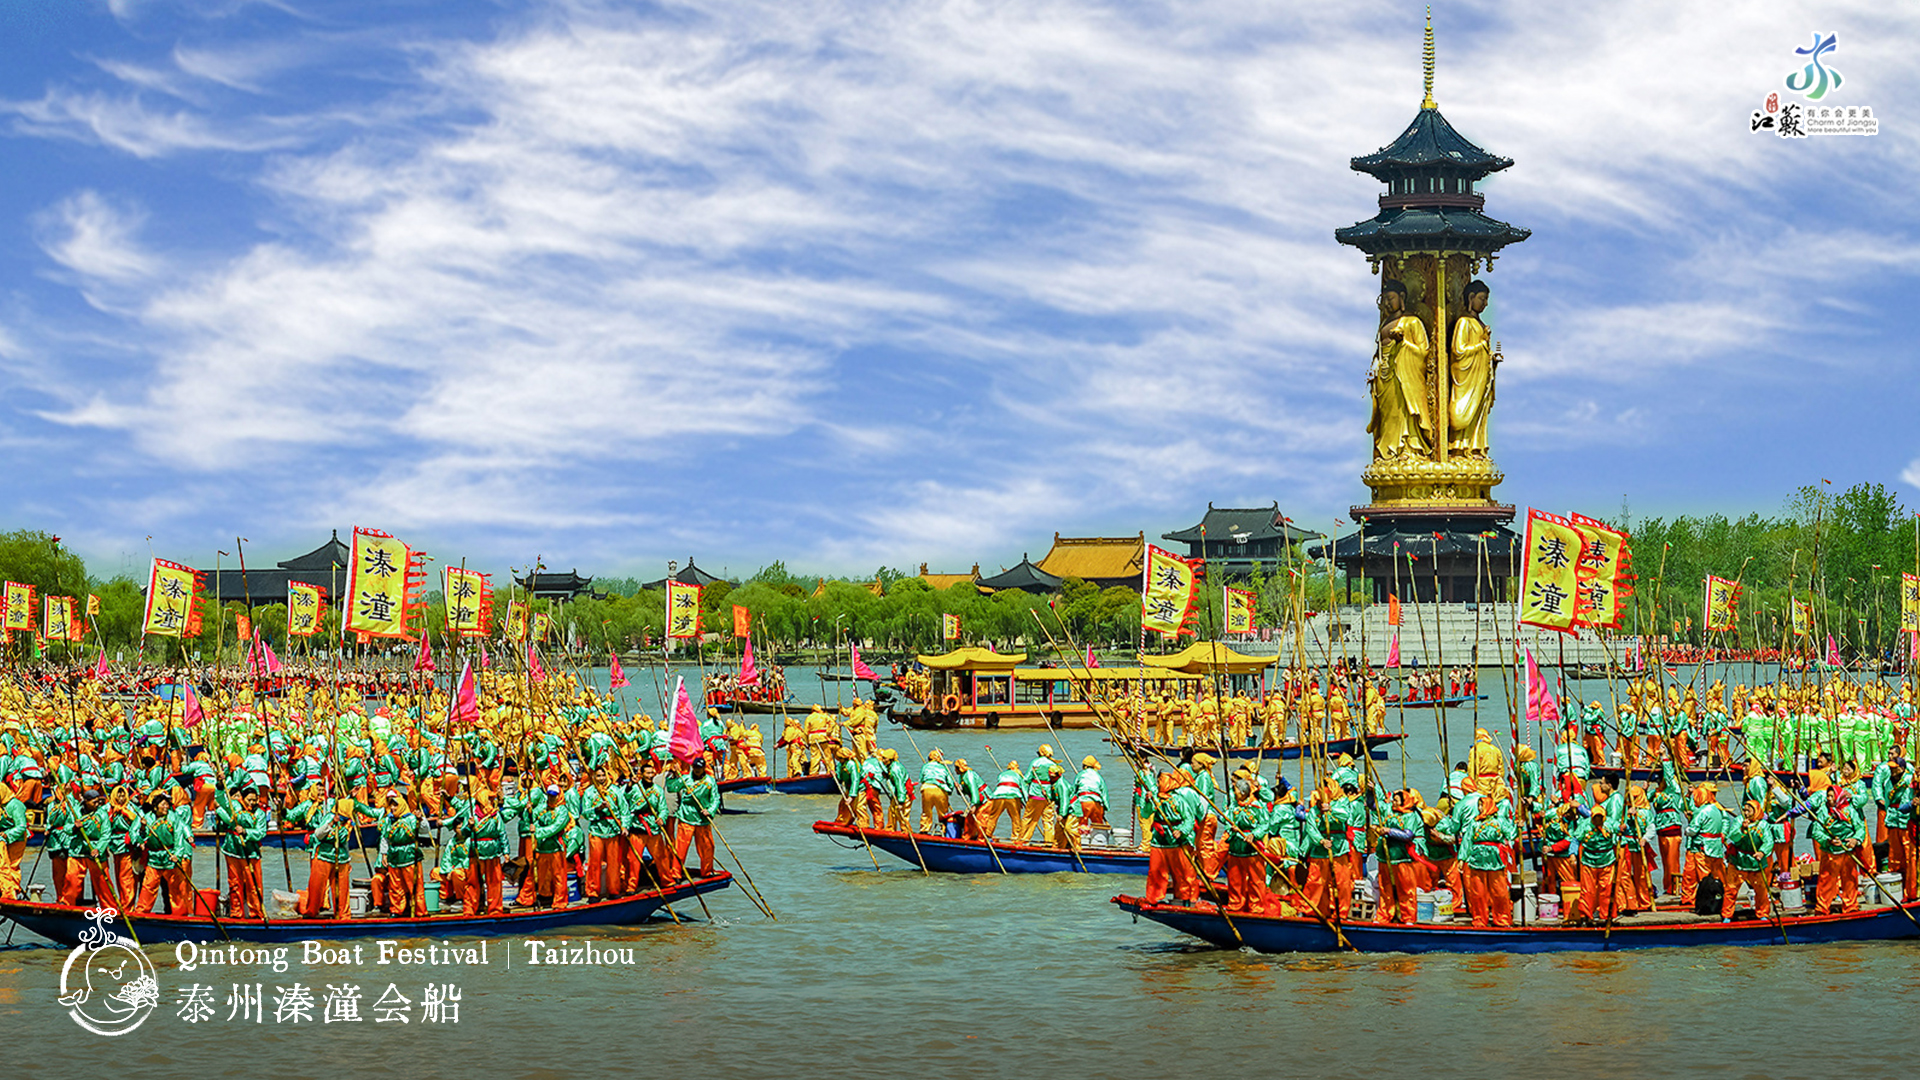 Undated photo shows people celebrating the Qintong Boat Festival in Taizhou, Jiangsu Province. /Photo provided to CGTN